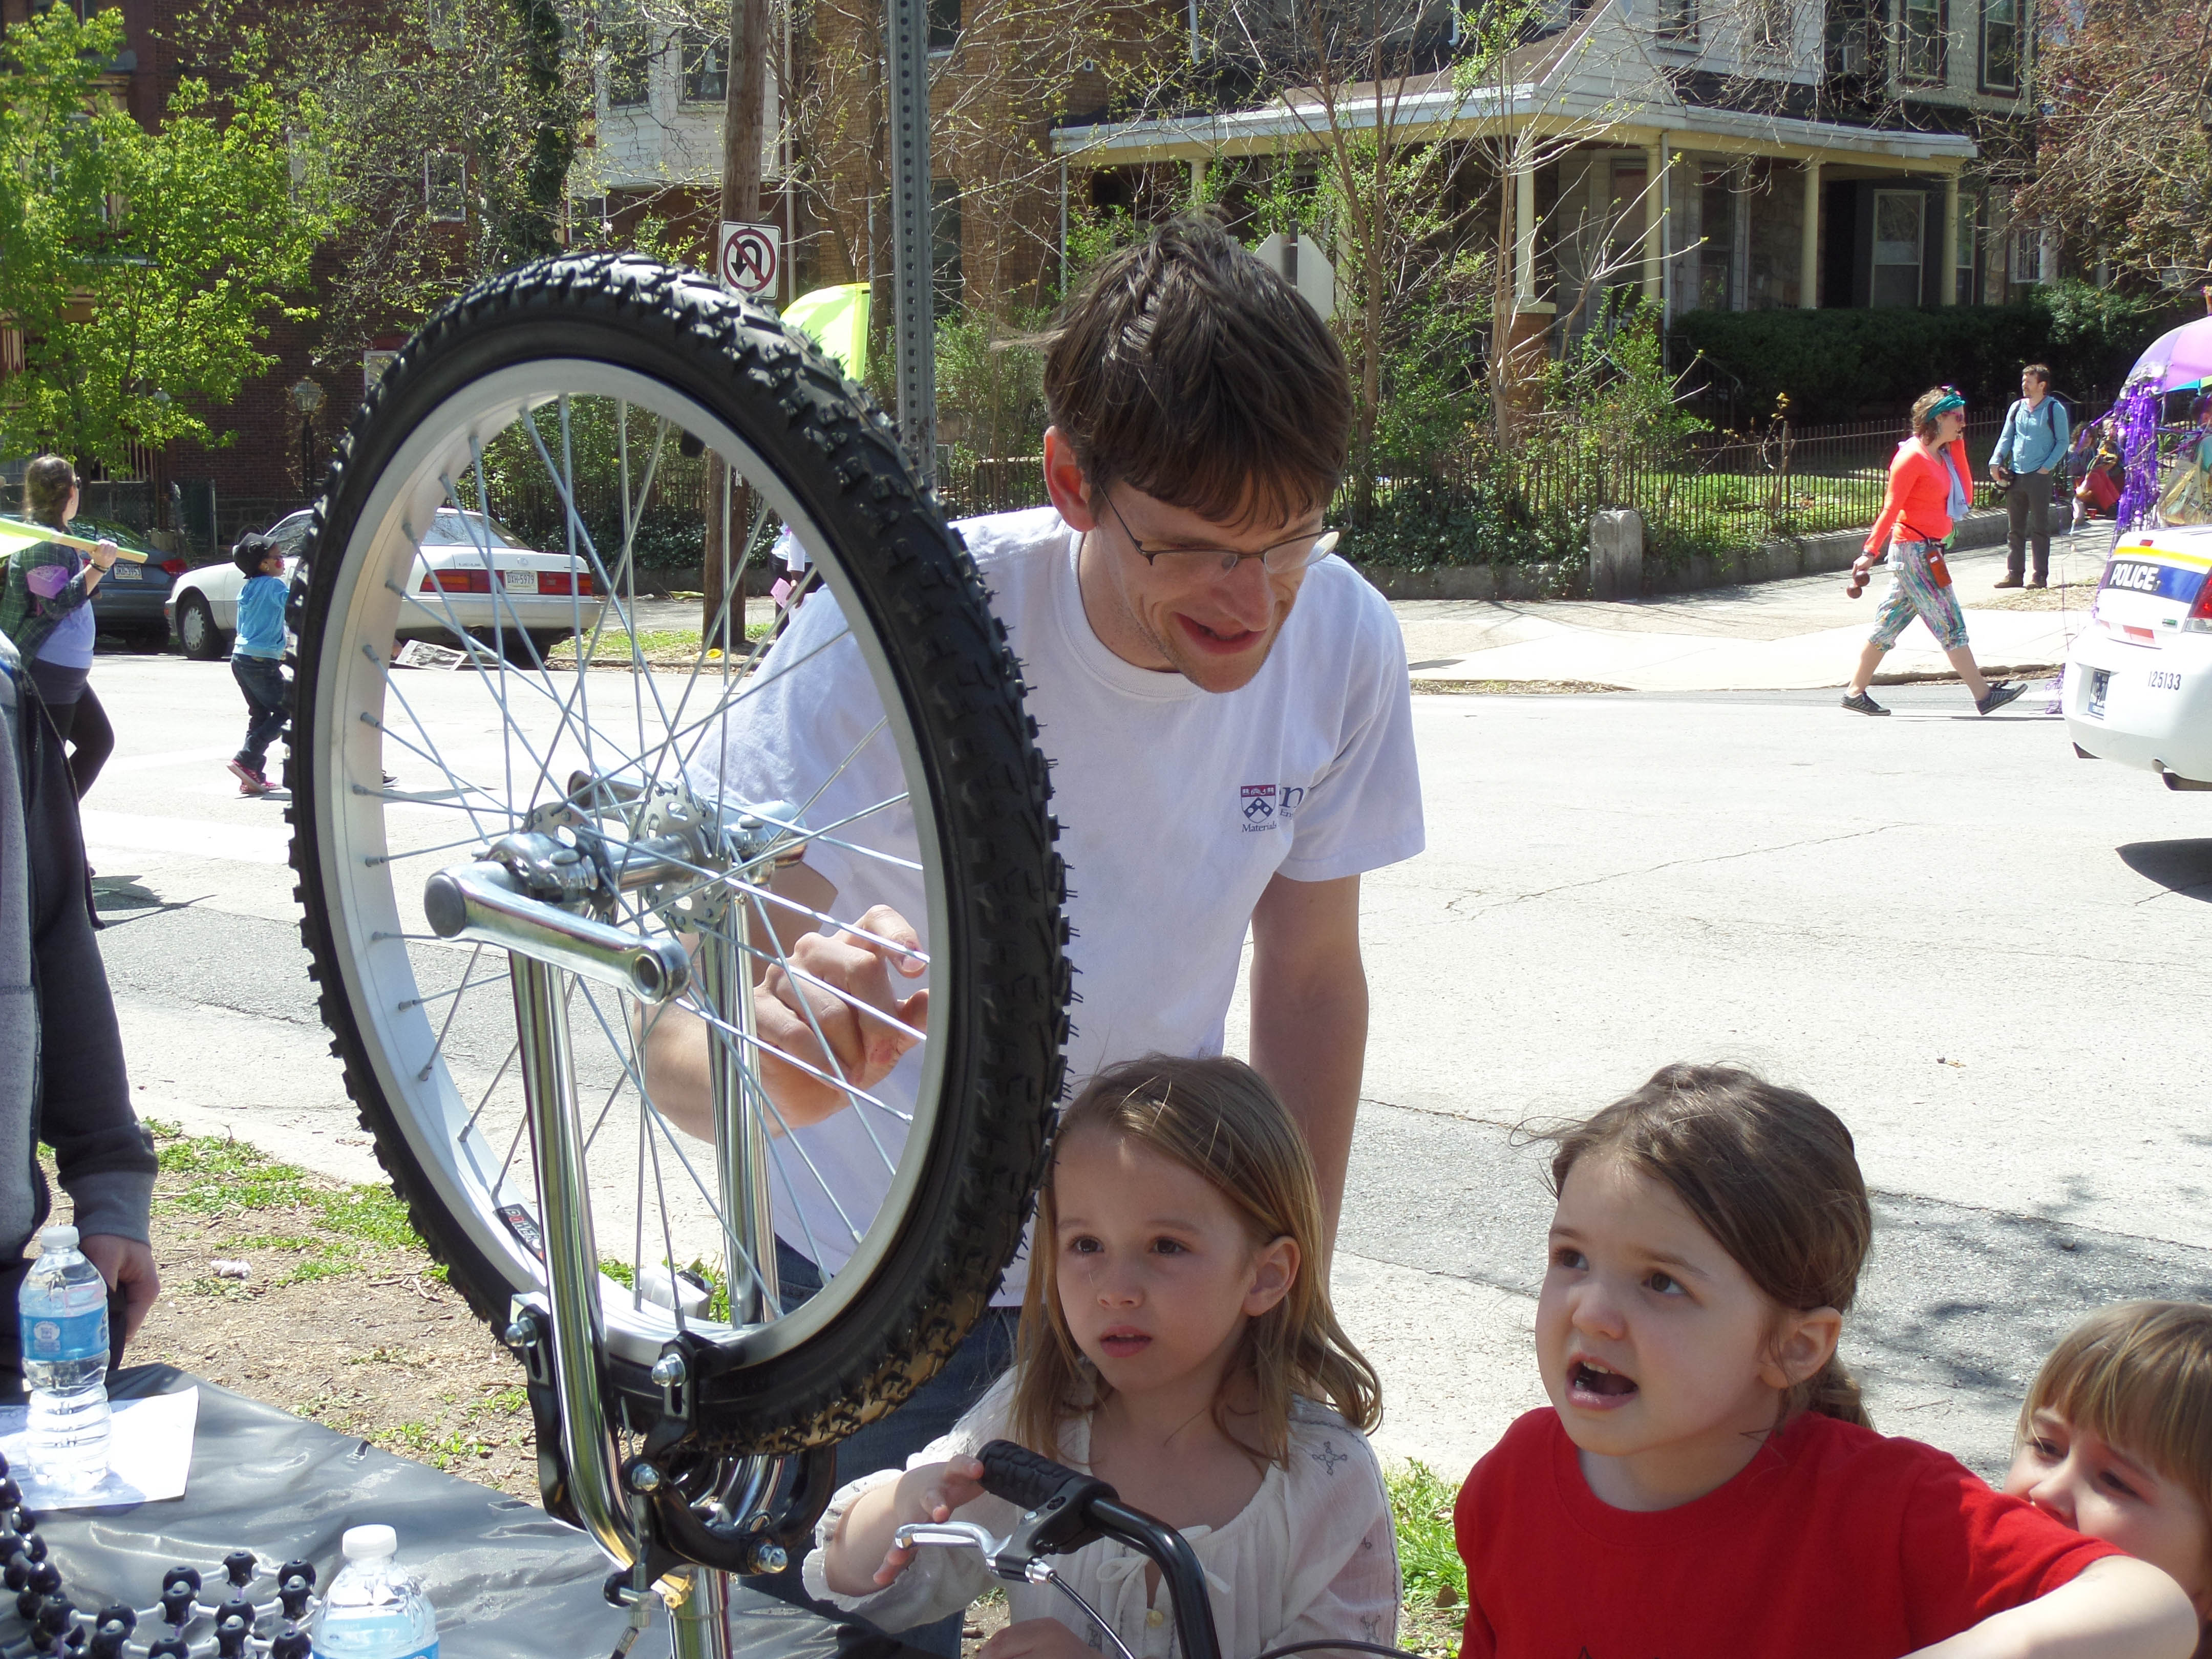 Tevis doing an experiment with children and a bike wheel